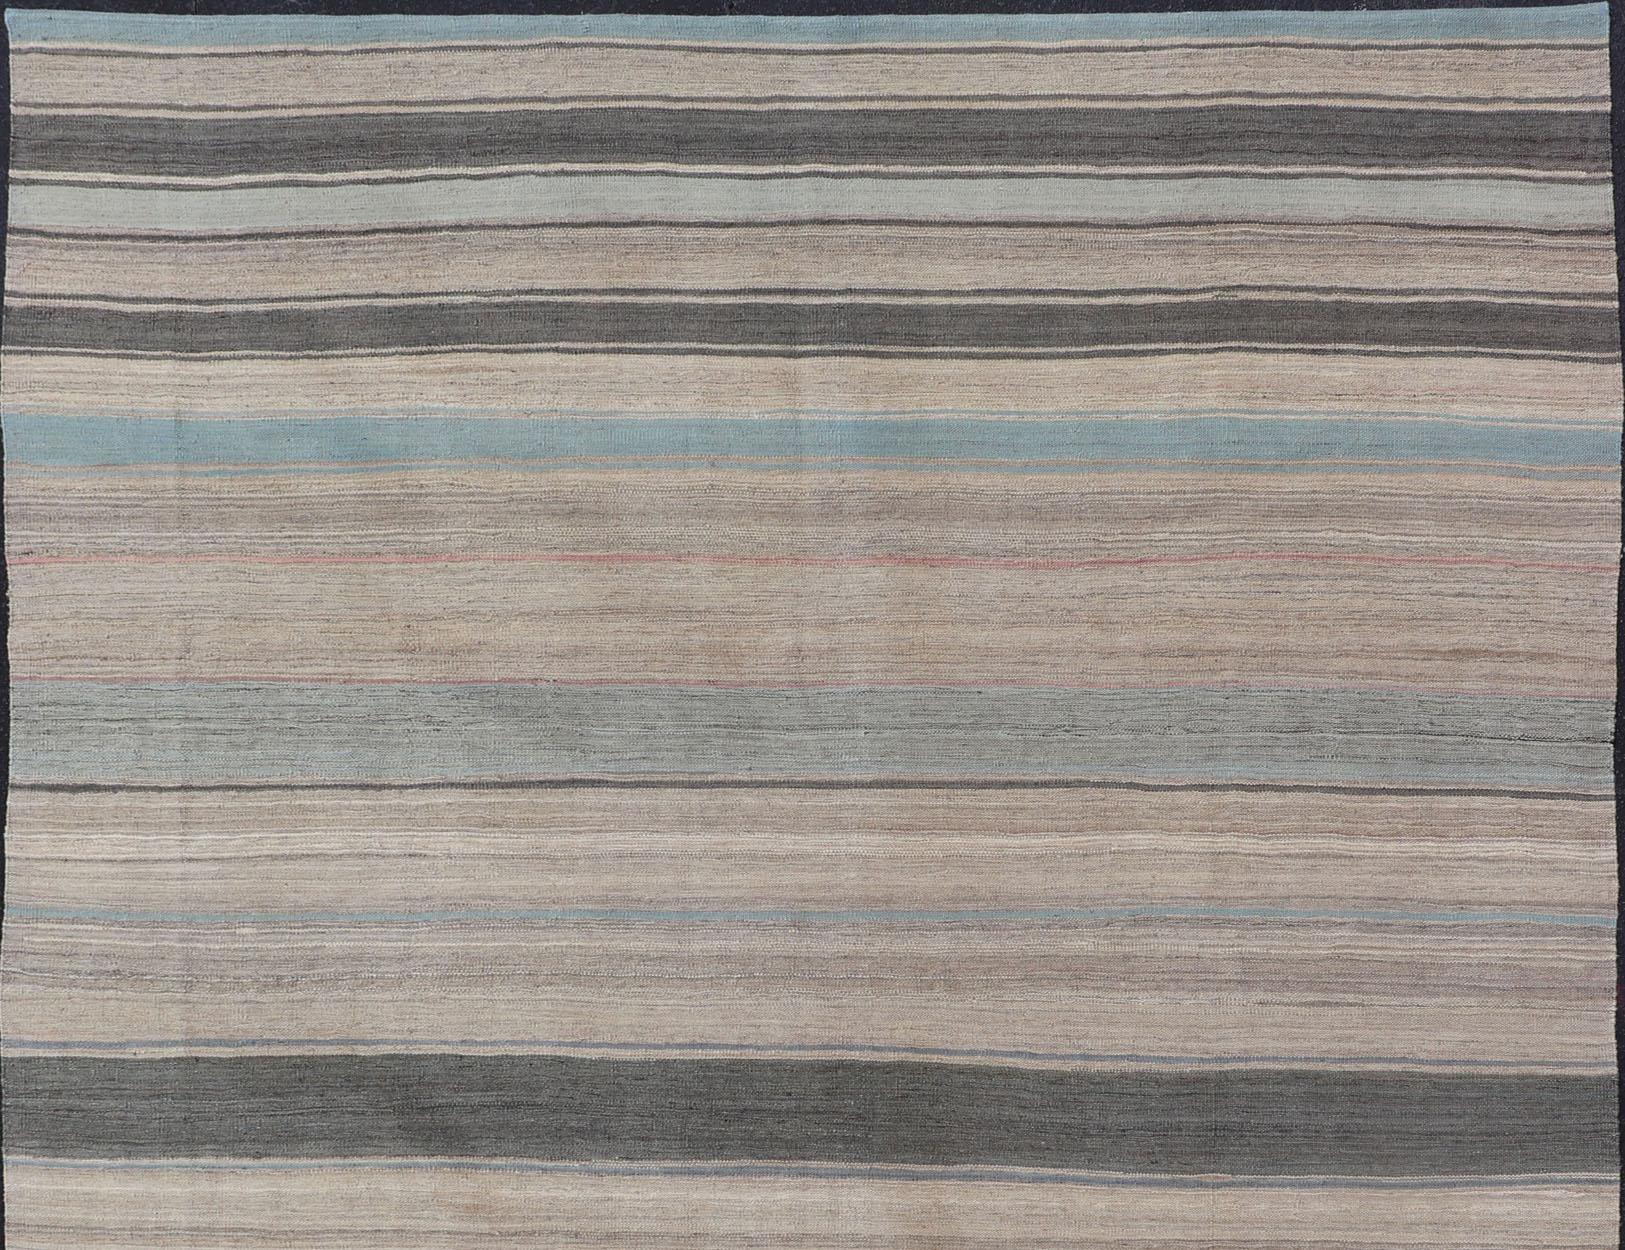 Flat-weave Kilim rug with stripes with modern design in shades of blue, taupe gray and cream, rug AFG-125, Keivan Woven Arts country of origin / type: Afghanistan / Kilim

This playful piece features a Classic stripe design that evokes casual and